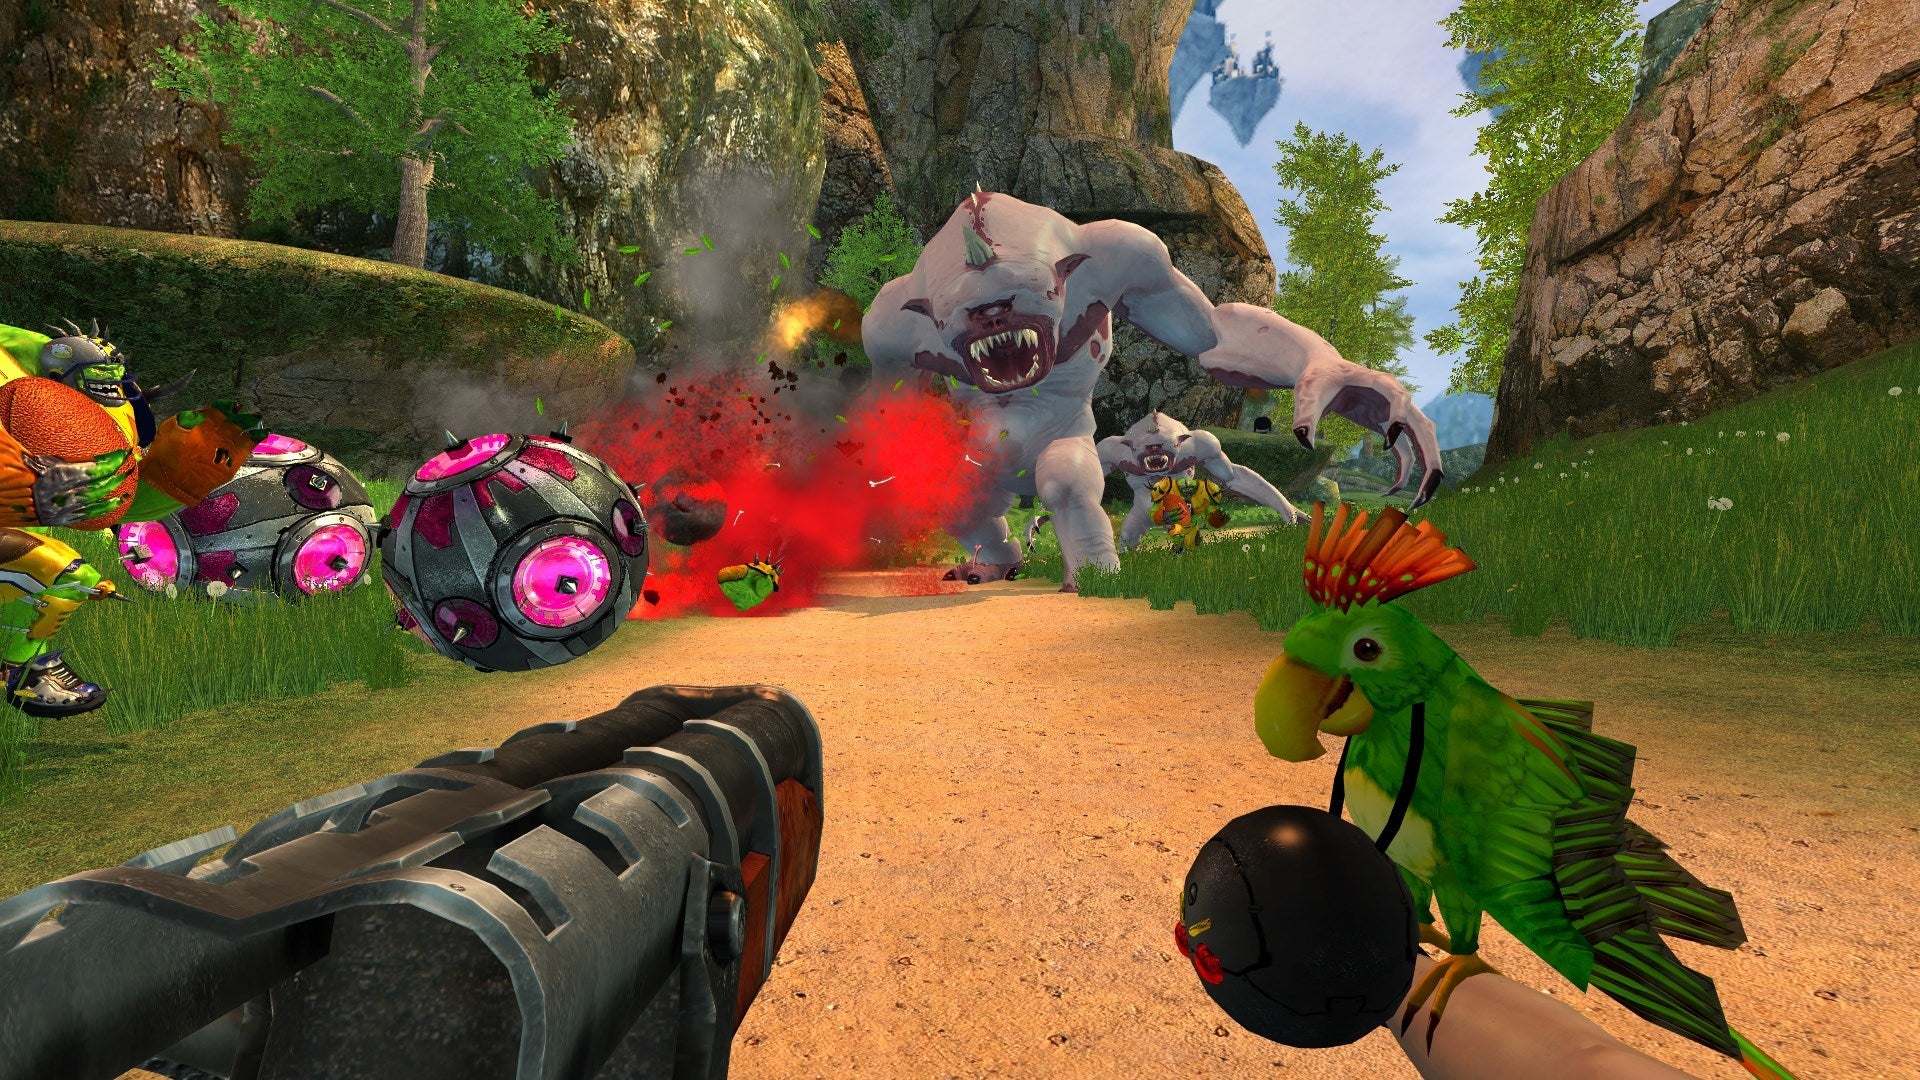 Serious Sam 2 - Same dual wields a shotgun and a bomb while fighting against a group of enemies.